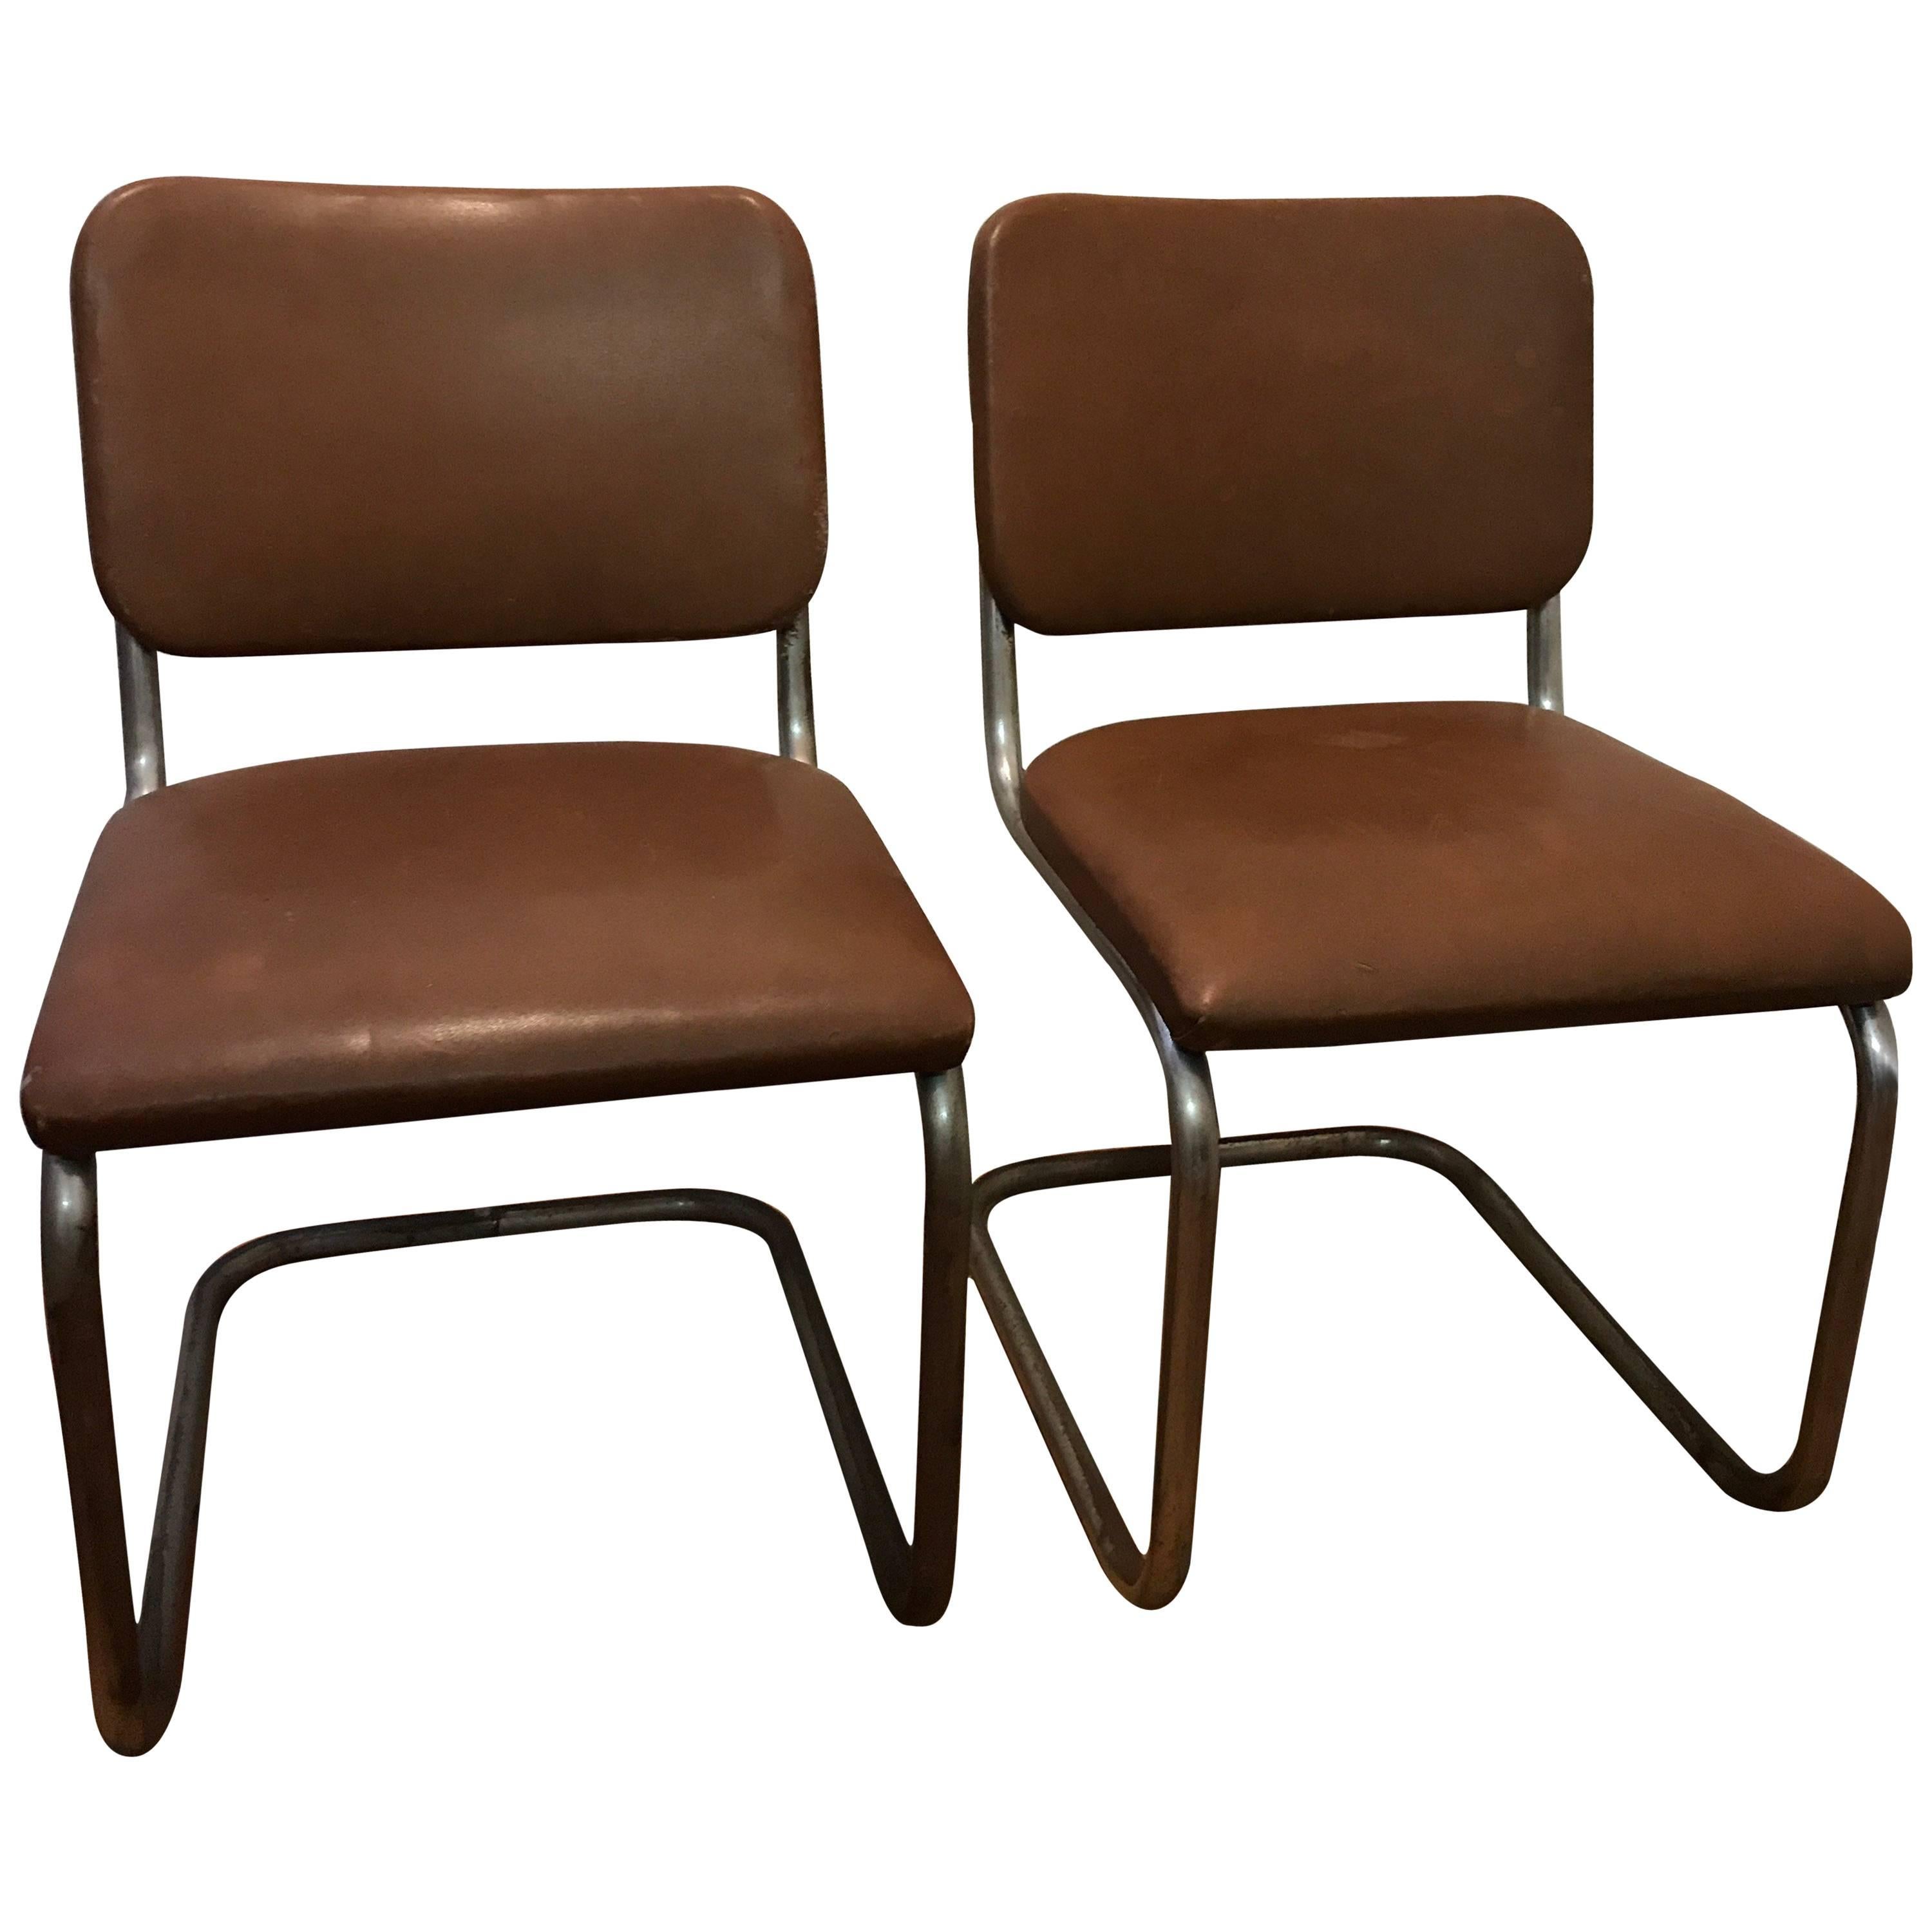 Pair of Thonet Chairs circa 1935-1950 Model B32 Simili Signed Collectors Items